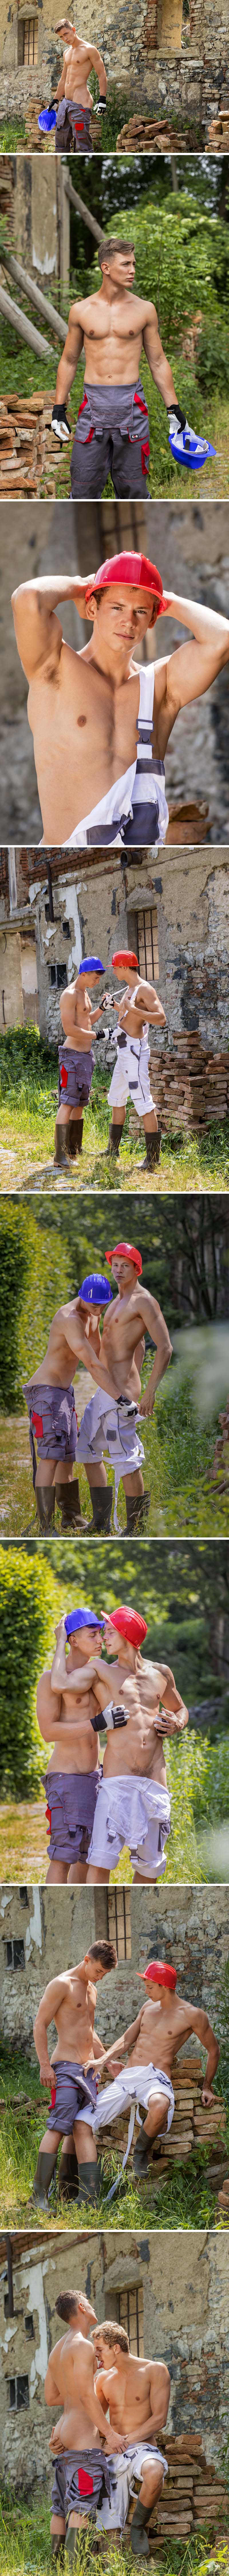 Jerome Exupery & Riis Erikson [Model of the Week] at BelAmiOnline